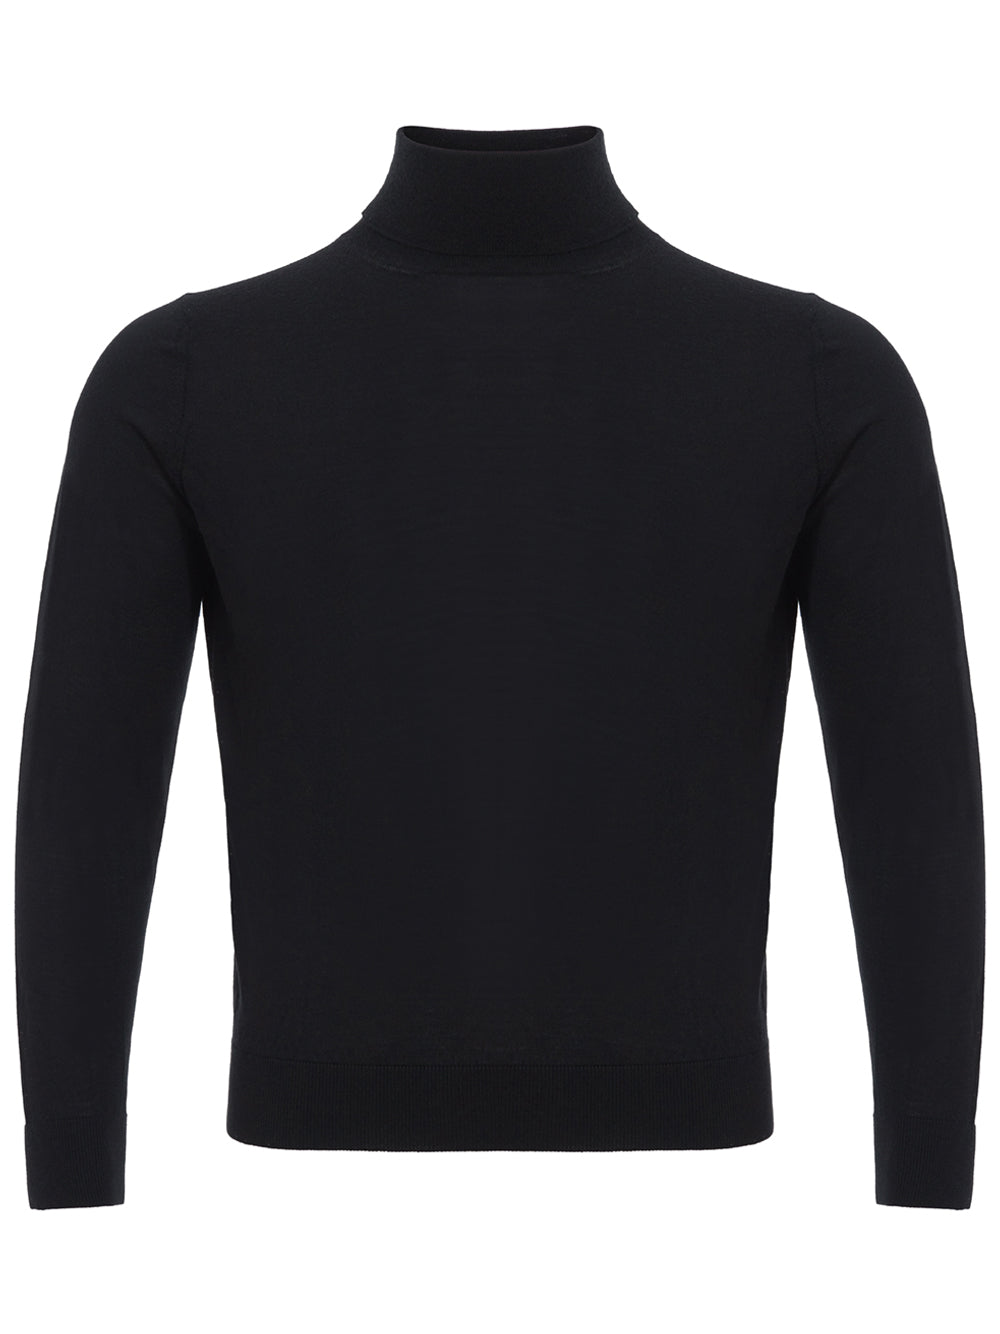 Colombo Cashmere and Silk Turtleneck